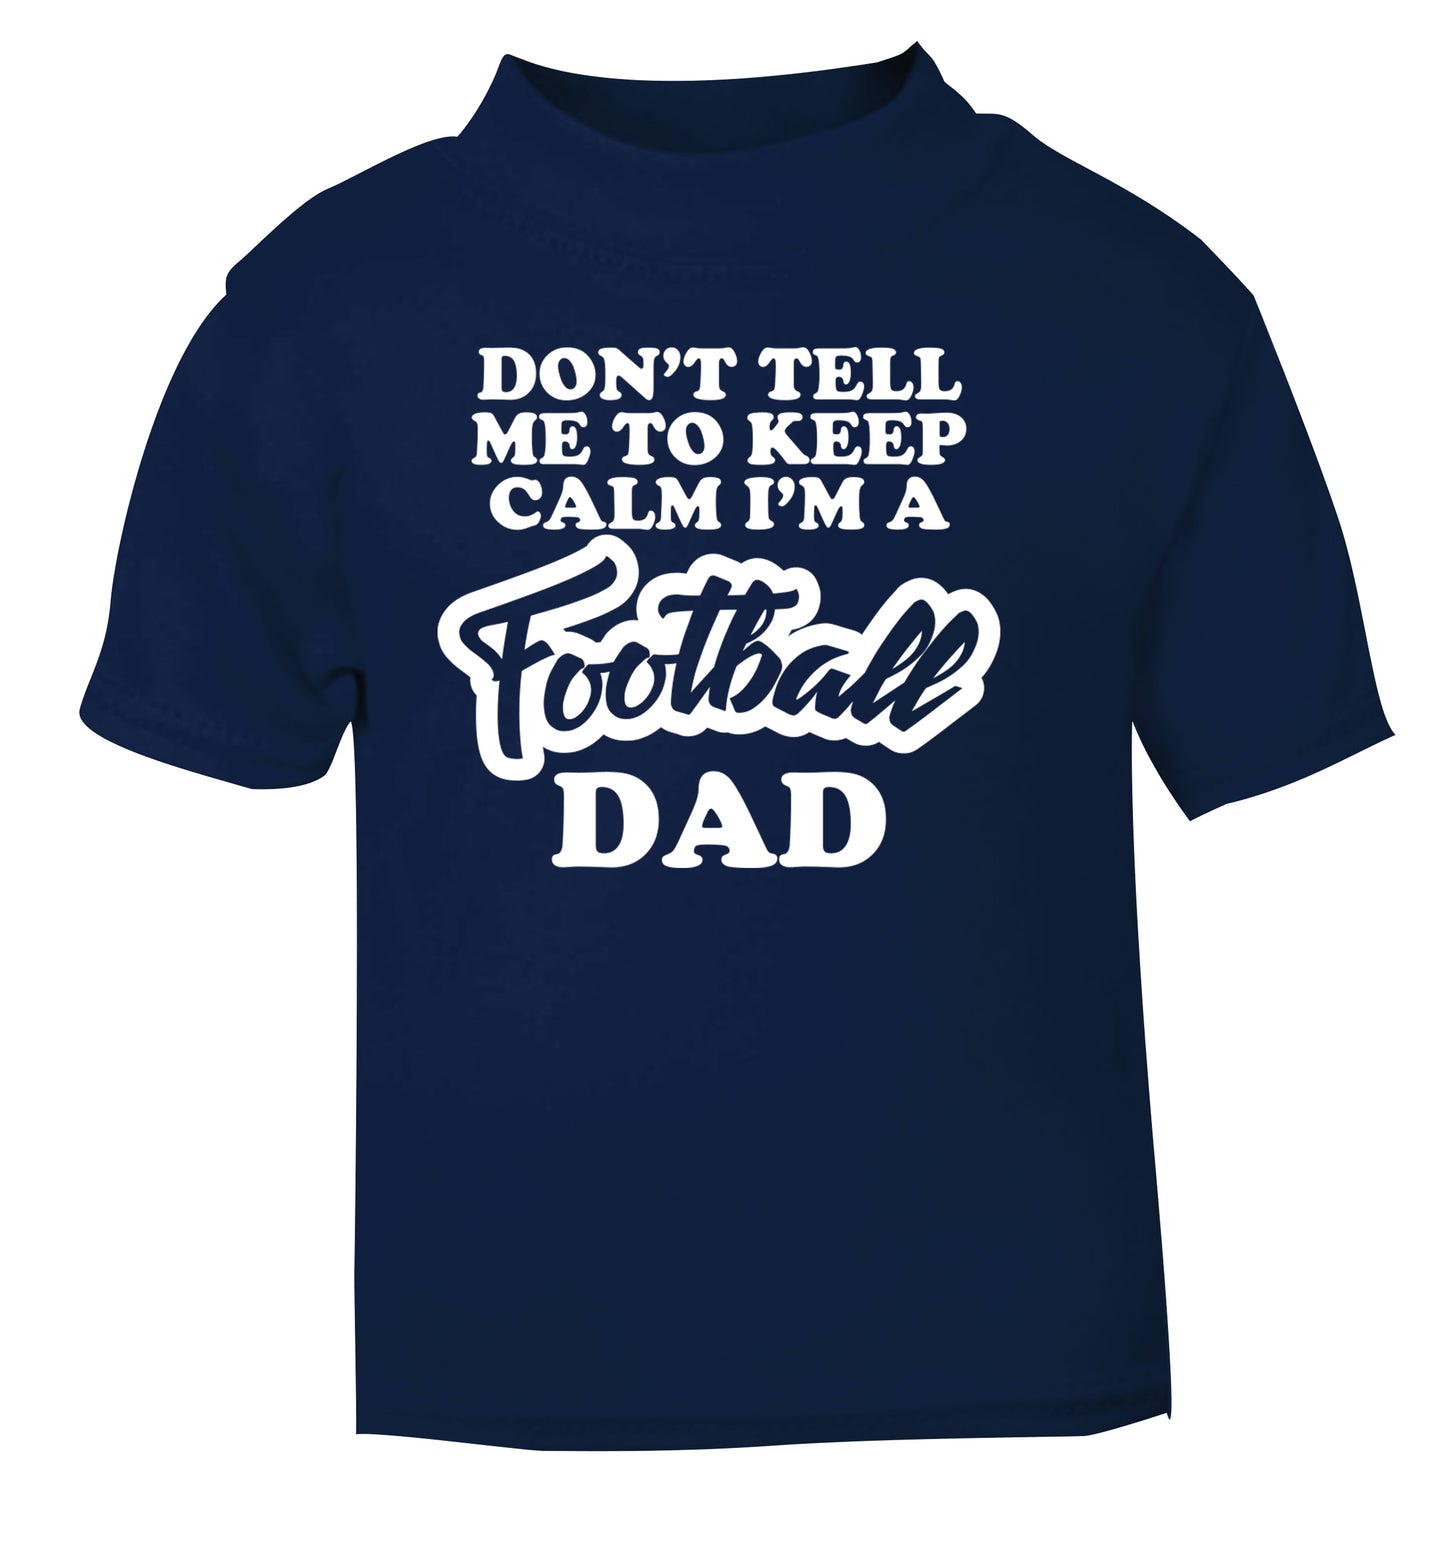 Don't tell me to keep calm I'm a football dad navy Baby Toddler Tshirt 2 Years